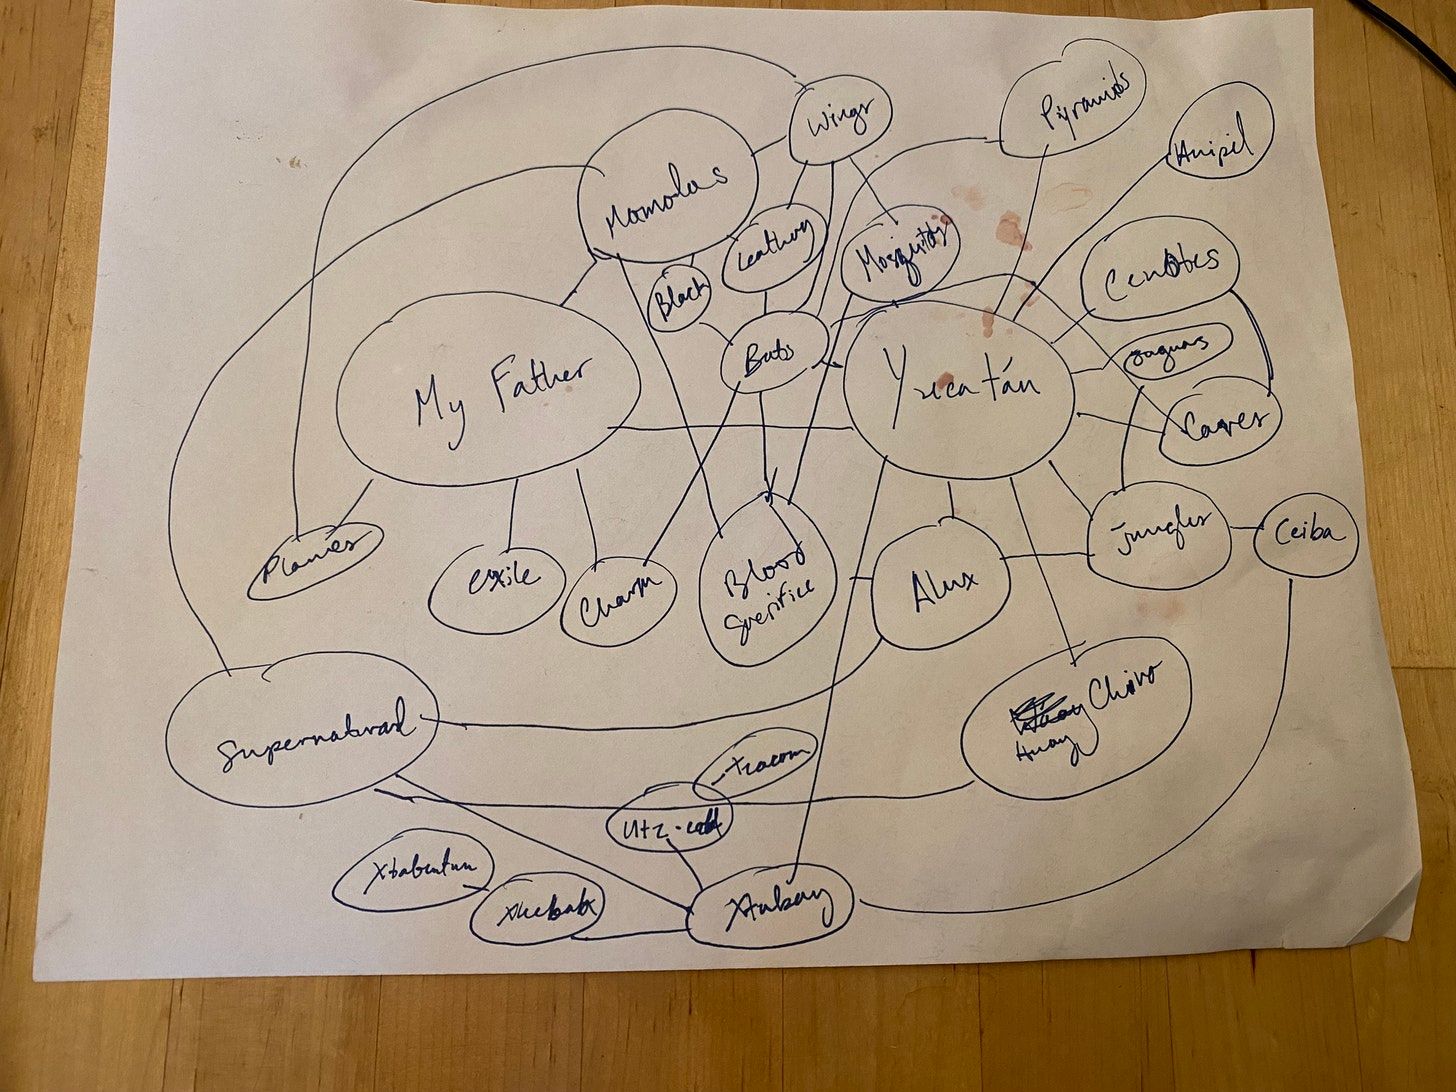 Mind Map for "Xtabay" a web of connected bubbles with concetps relating to Yucatán. It's scribbled in pen on a white sheet of printer paper, and has a suspicious stain on it that is almost certainly not blood, really...